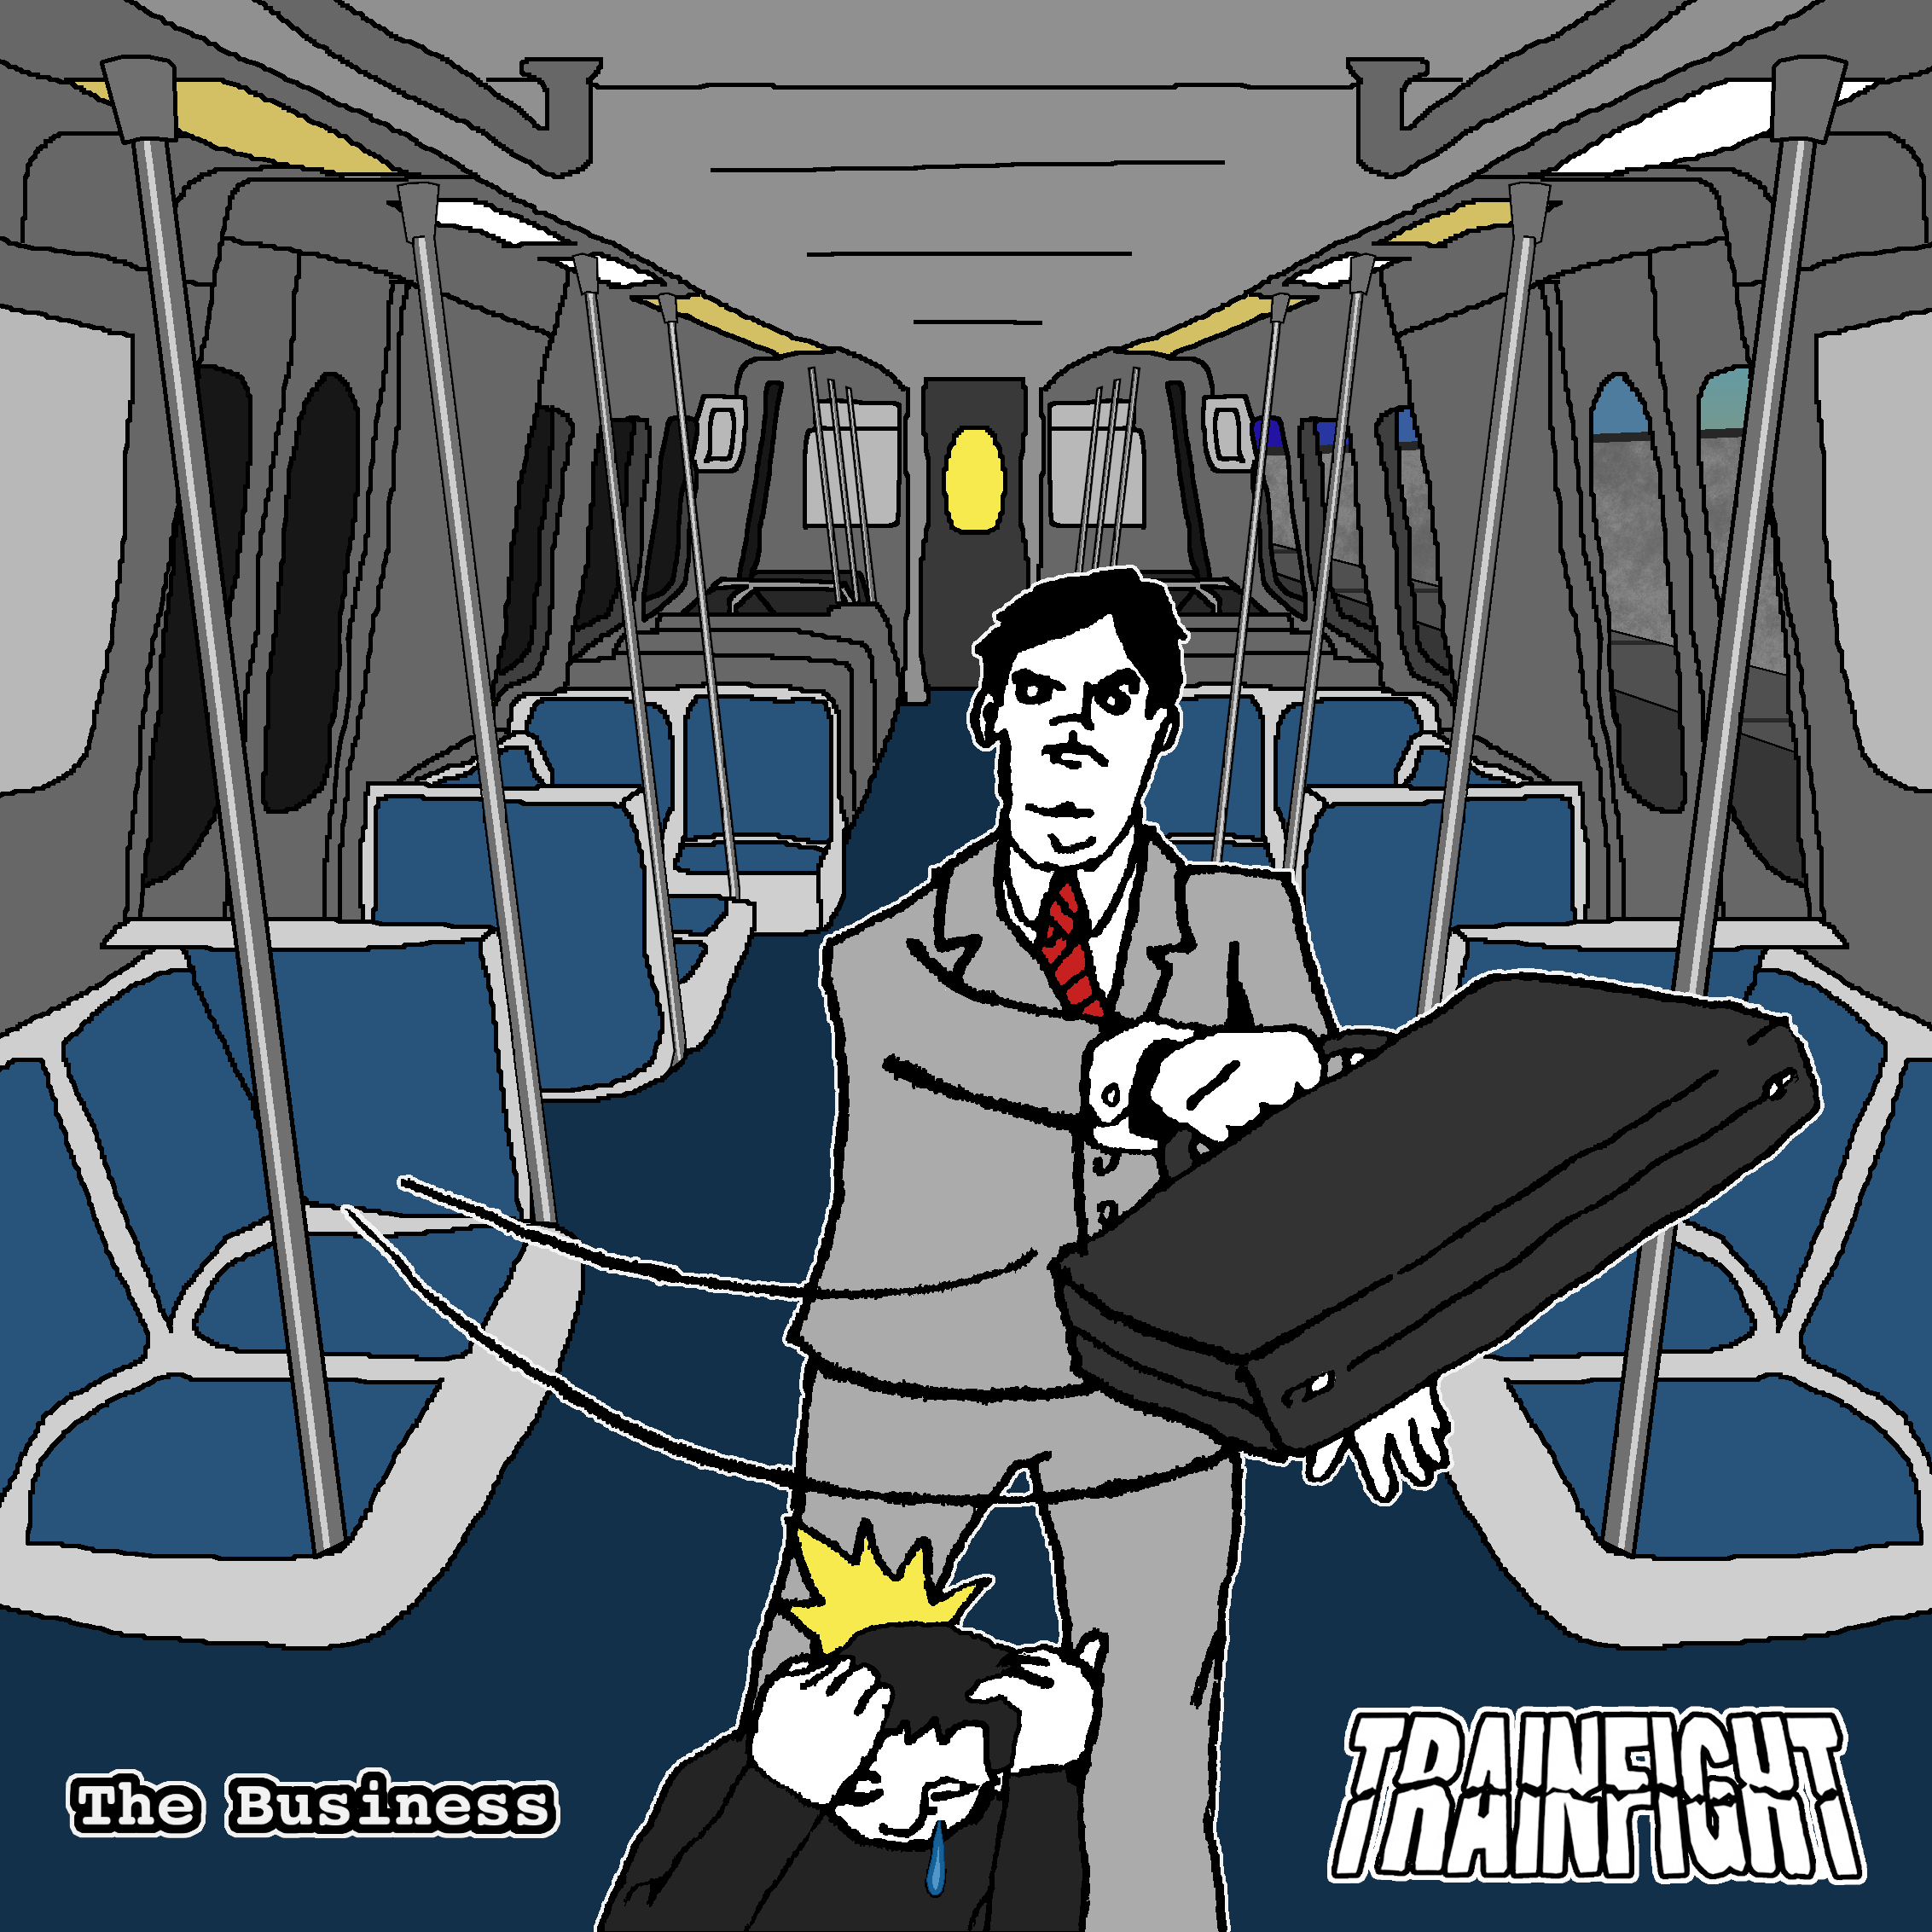 The Business by Trainfight Album Cover